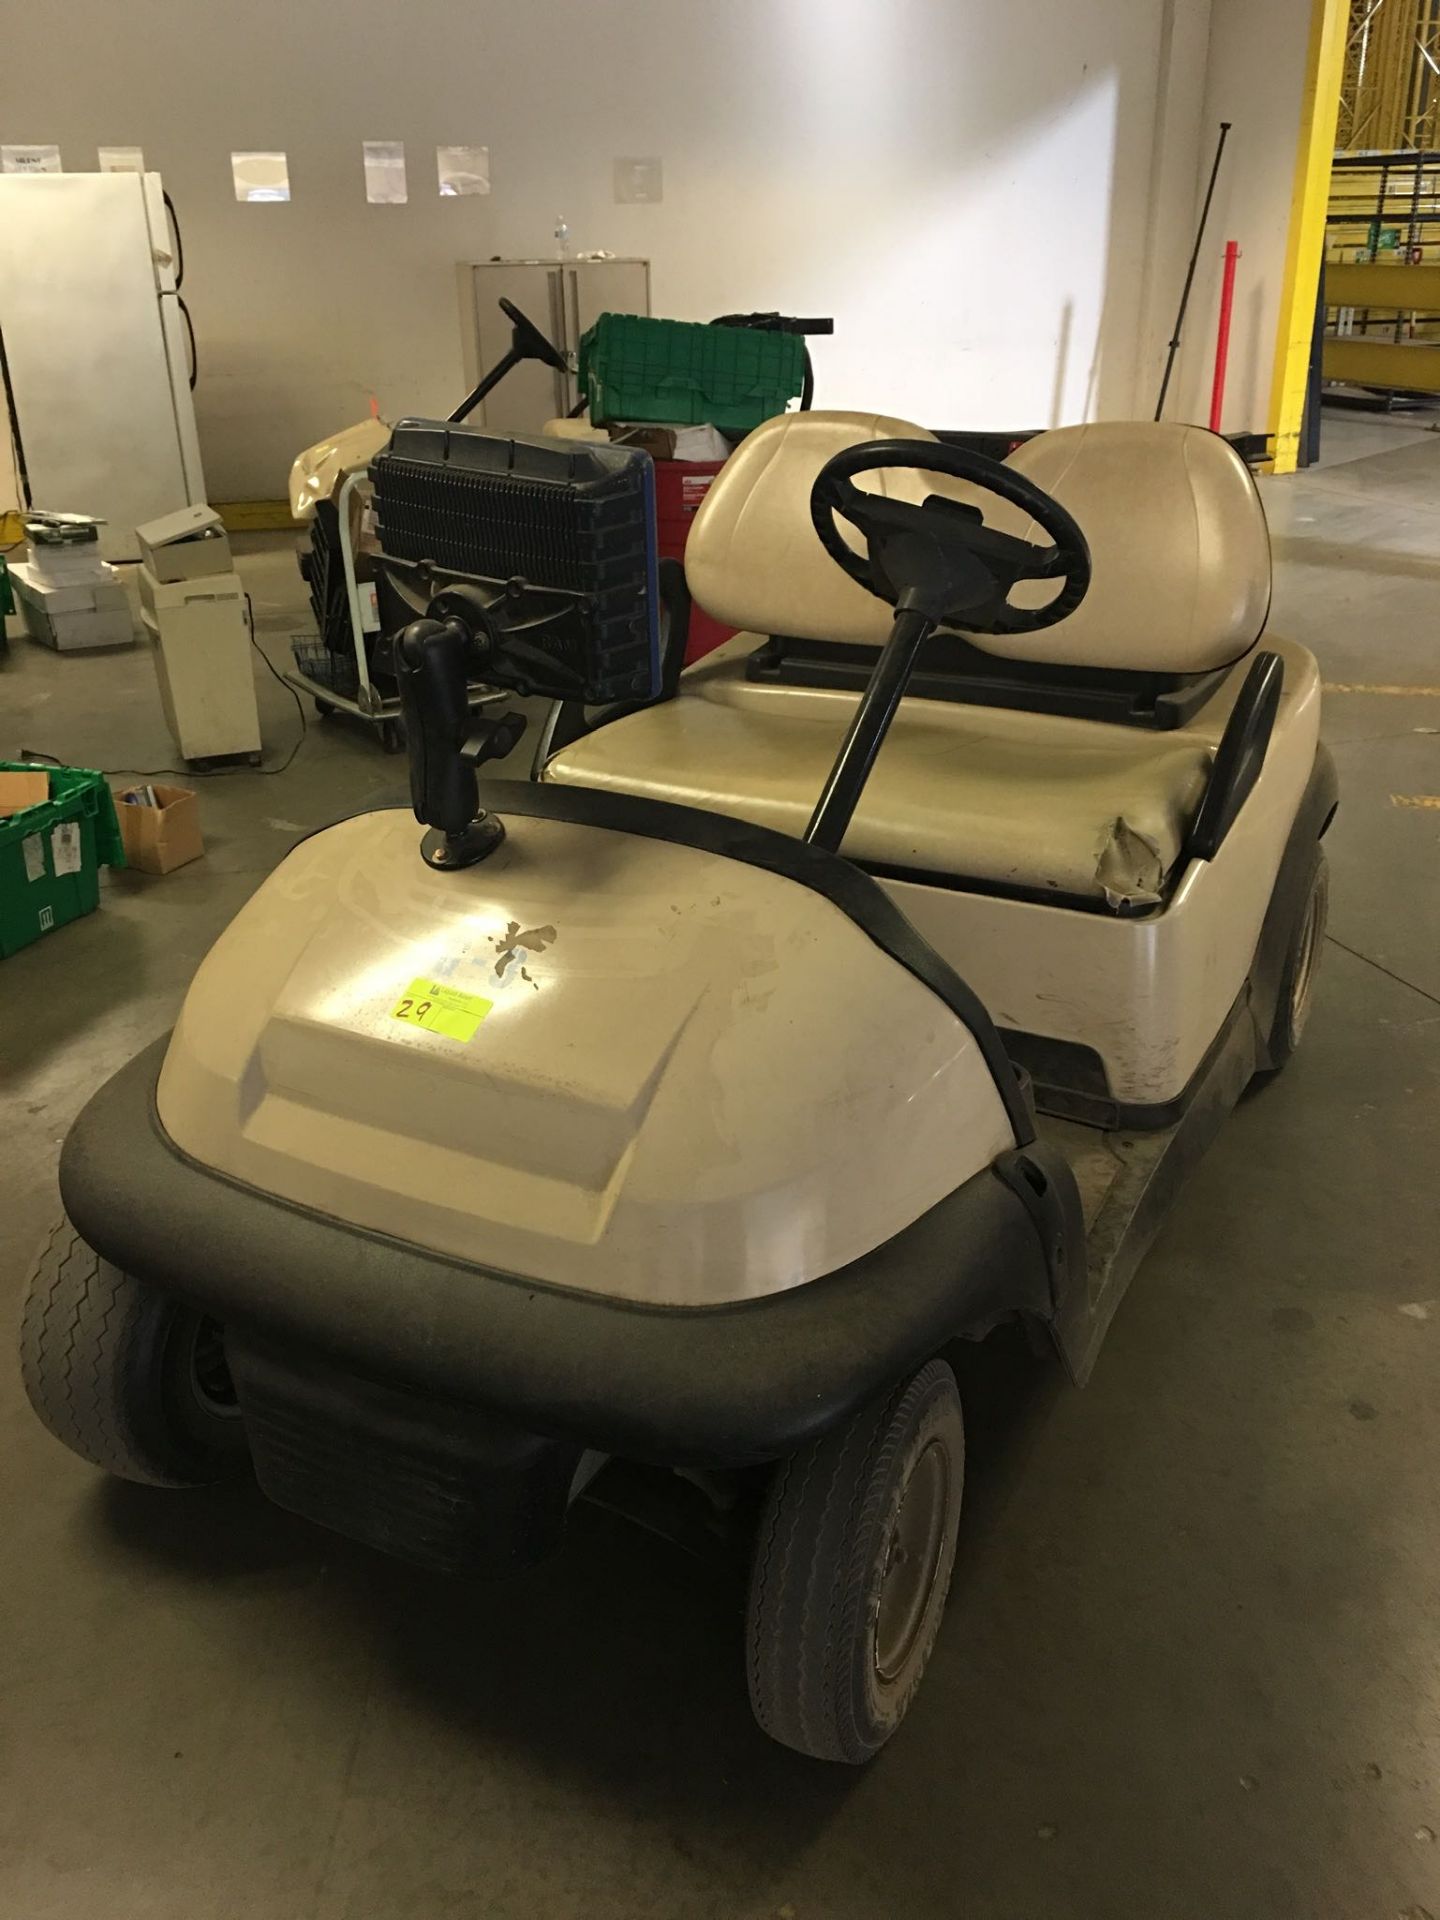 CLUB CAR GOLF CART WITH CHARGER. Model #: UNKNOWN. Serial #: UNKNOWN. Unit #: G3. Please see